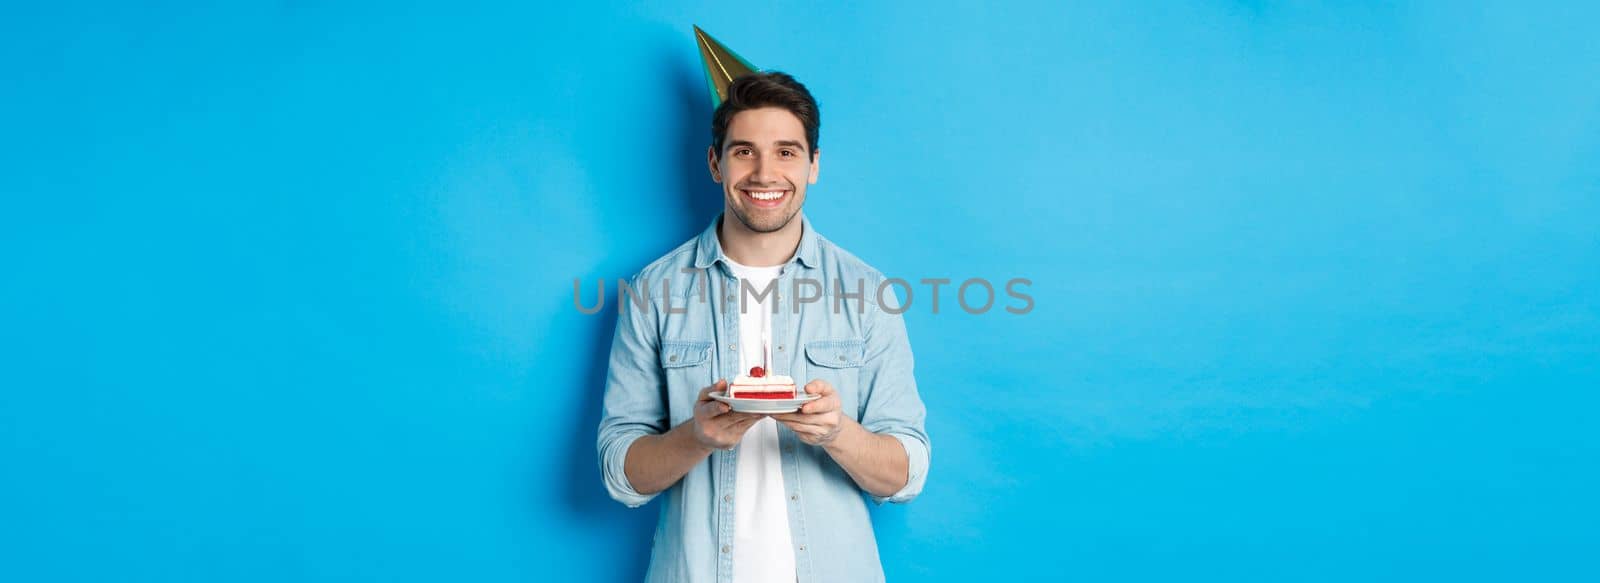 Smiling man holding b-day cake and wearing birthday party hat, celebrating over blue background.